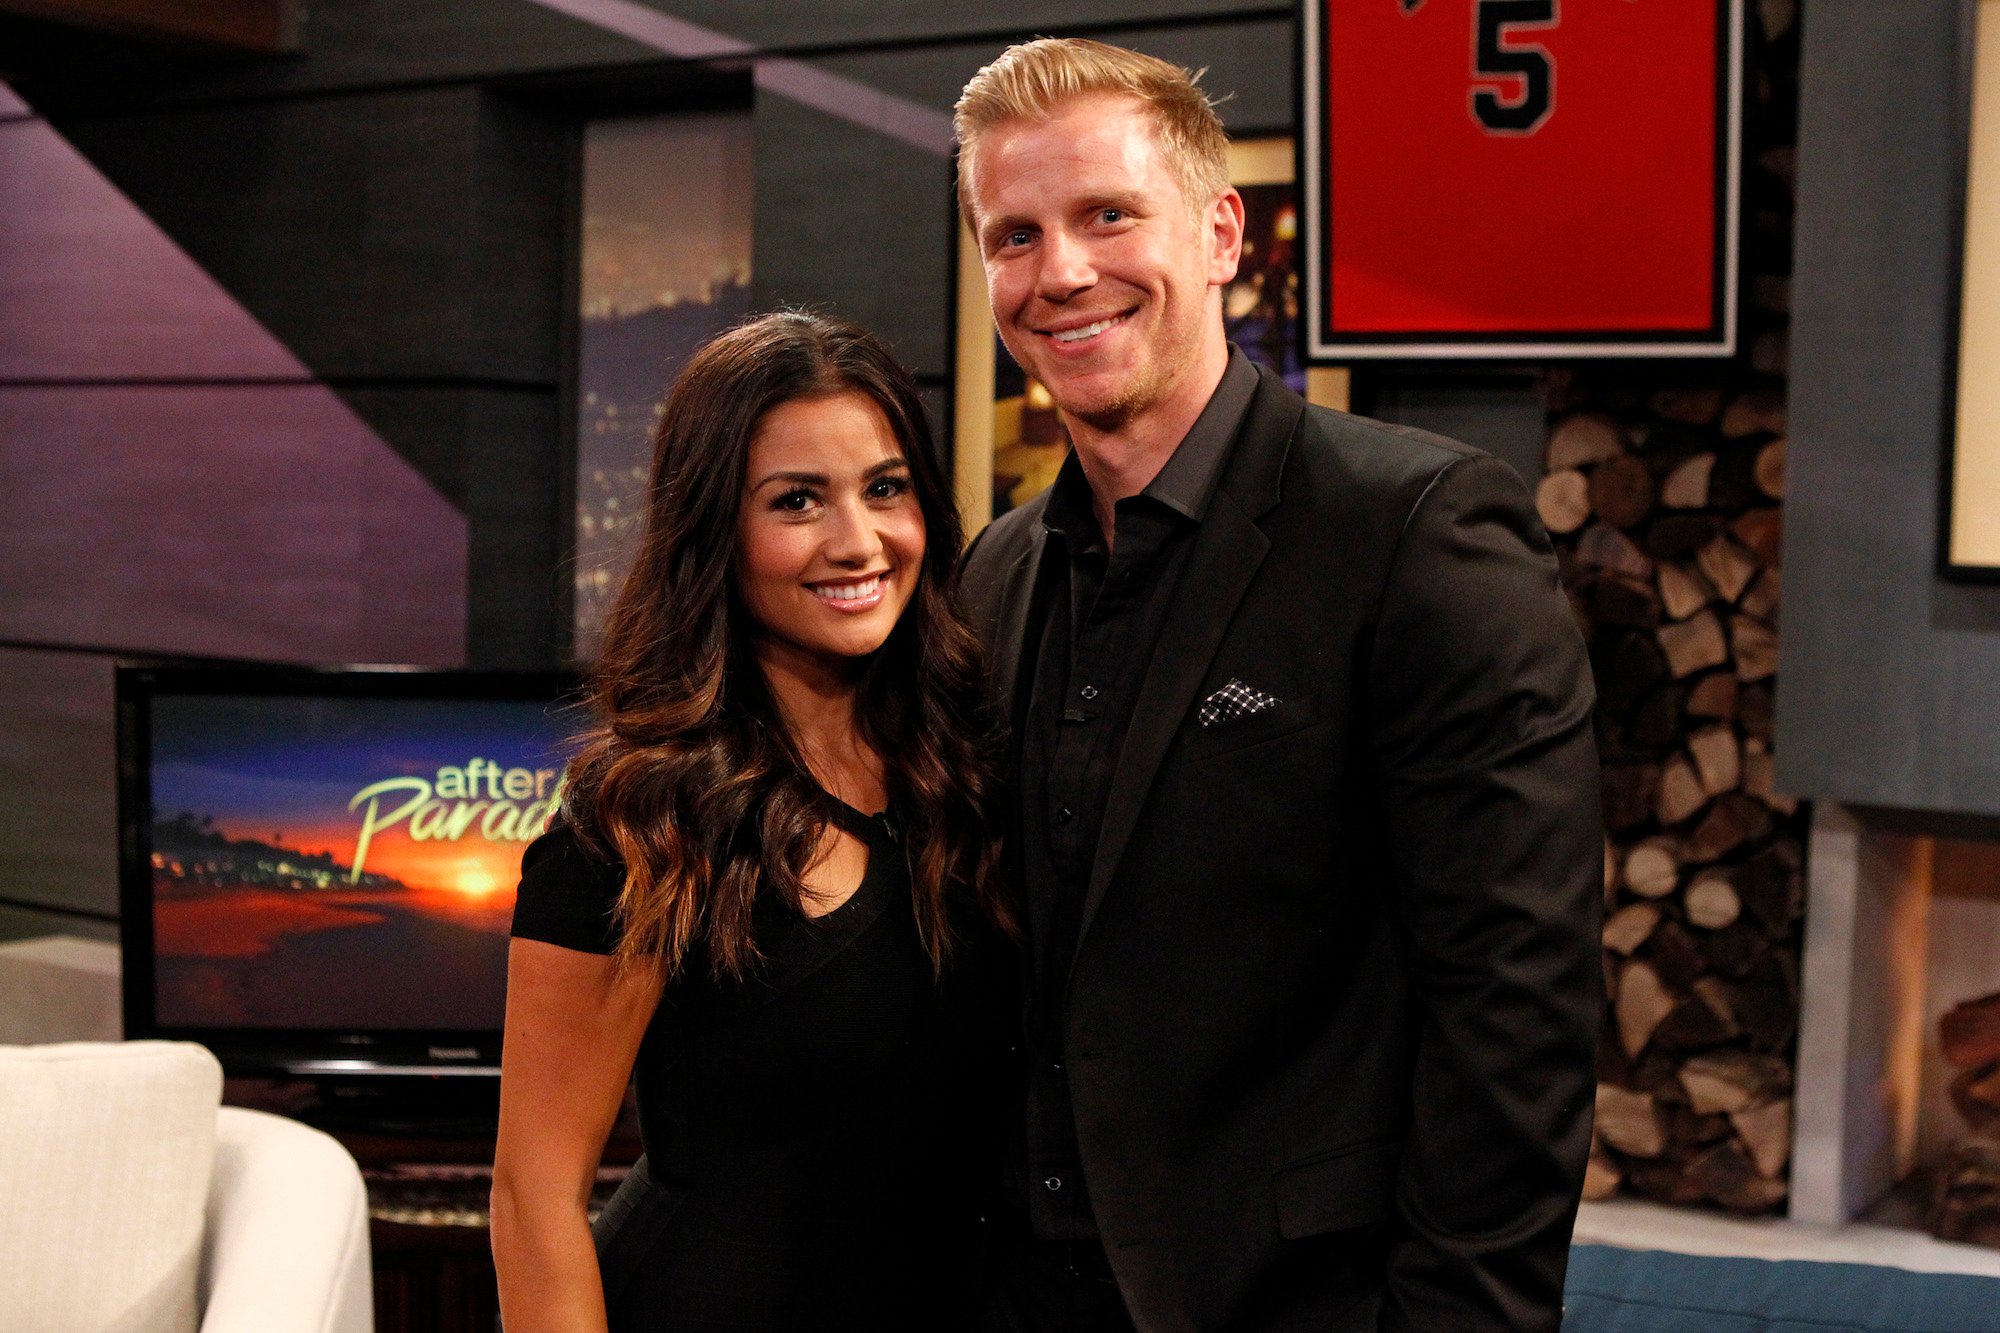 ‘Bachelor’ Contestant Catherine Giudici Lowe Explains Why Couples Who Get Engaged on the Show Are at a ‘Disadvantage’